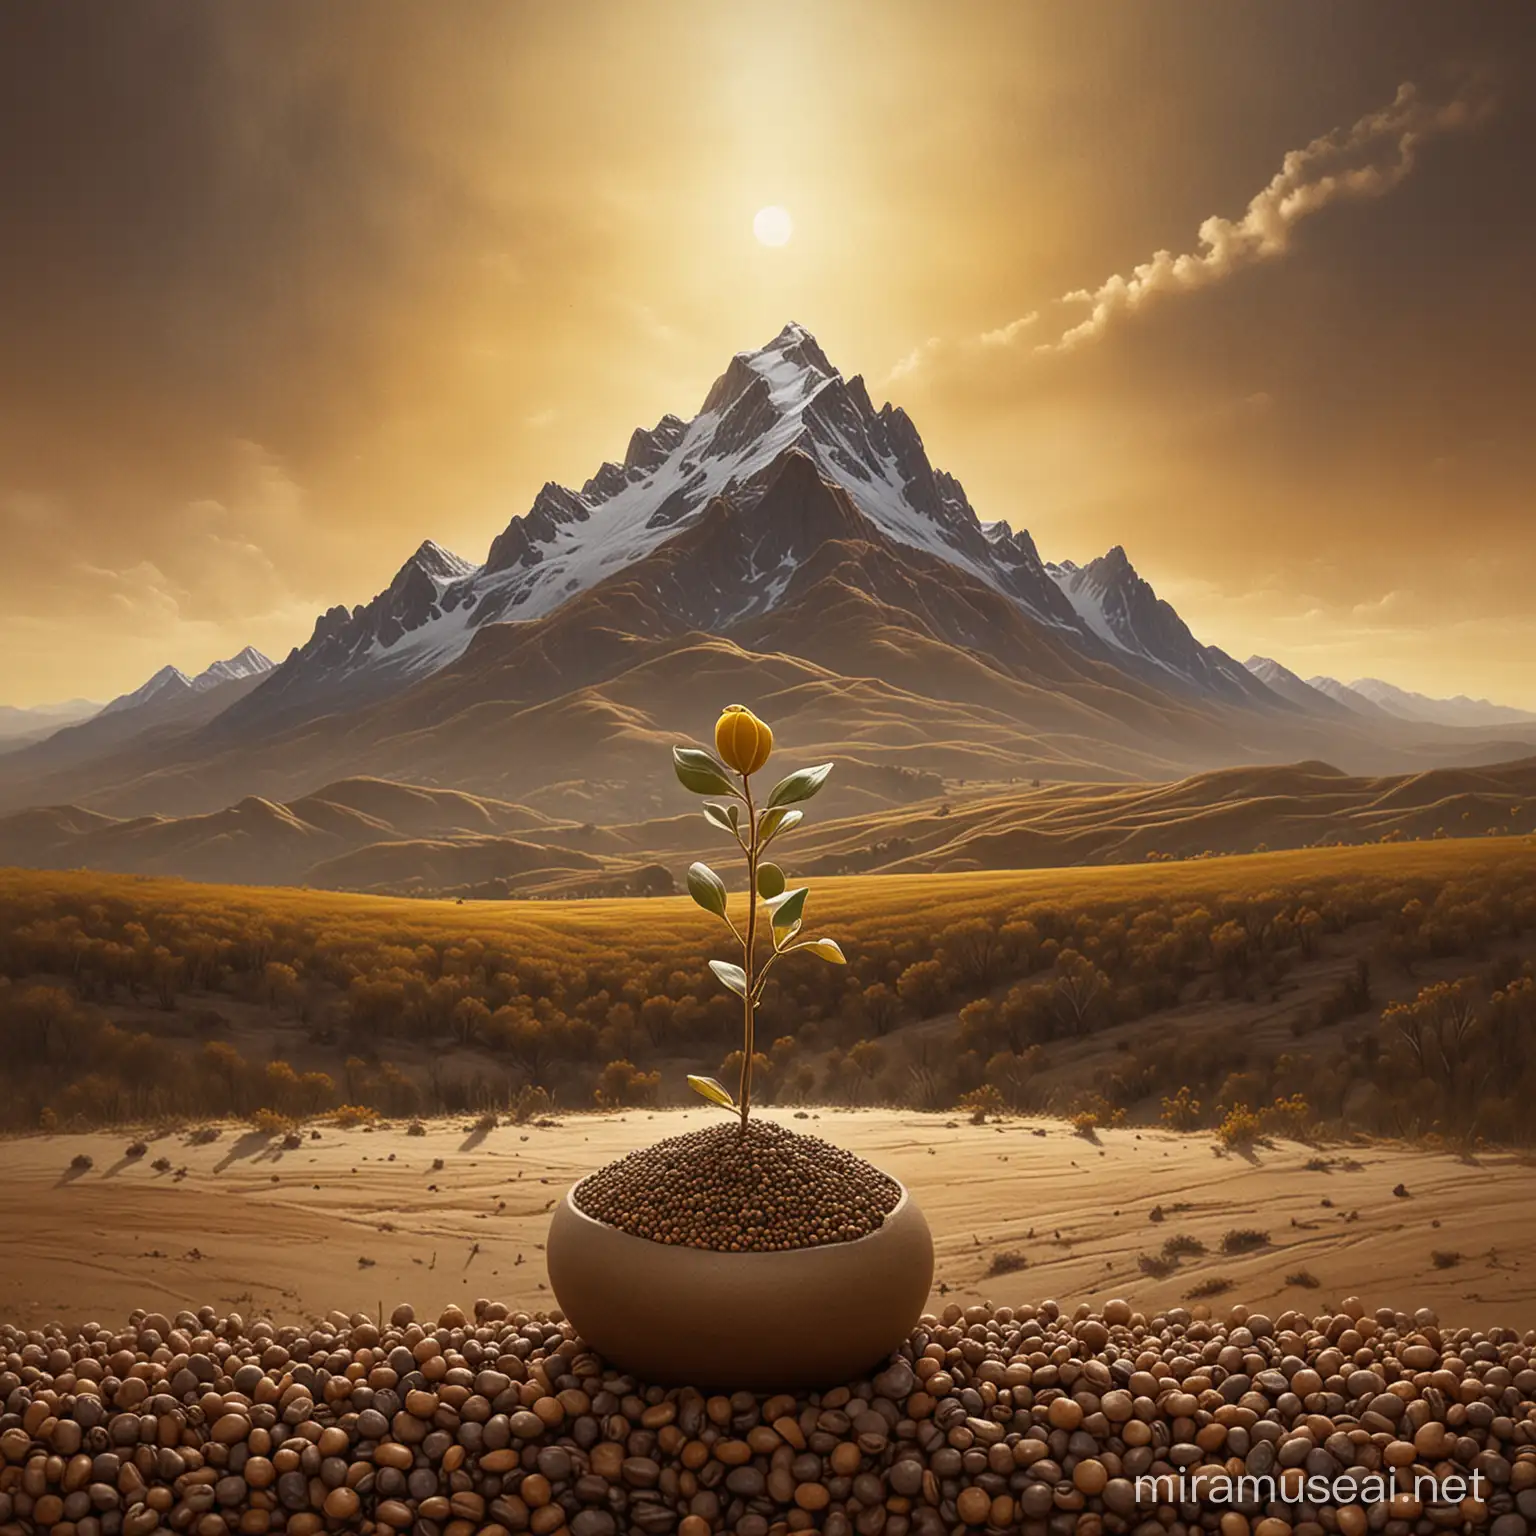  A symbolic portrayal of faith, a tiny mustard seed poised to move mountains, with a significant, potential-laden seed conveying unwavering belief. Earthy tones enrich this spiritual art,